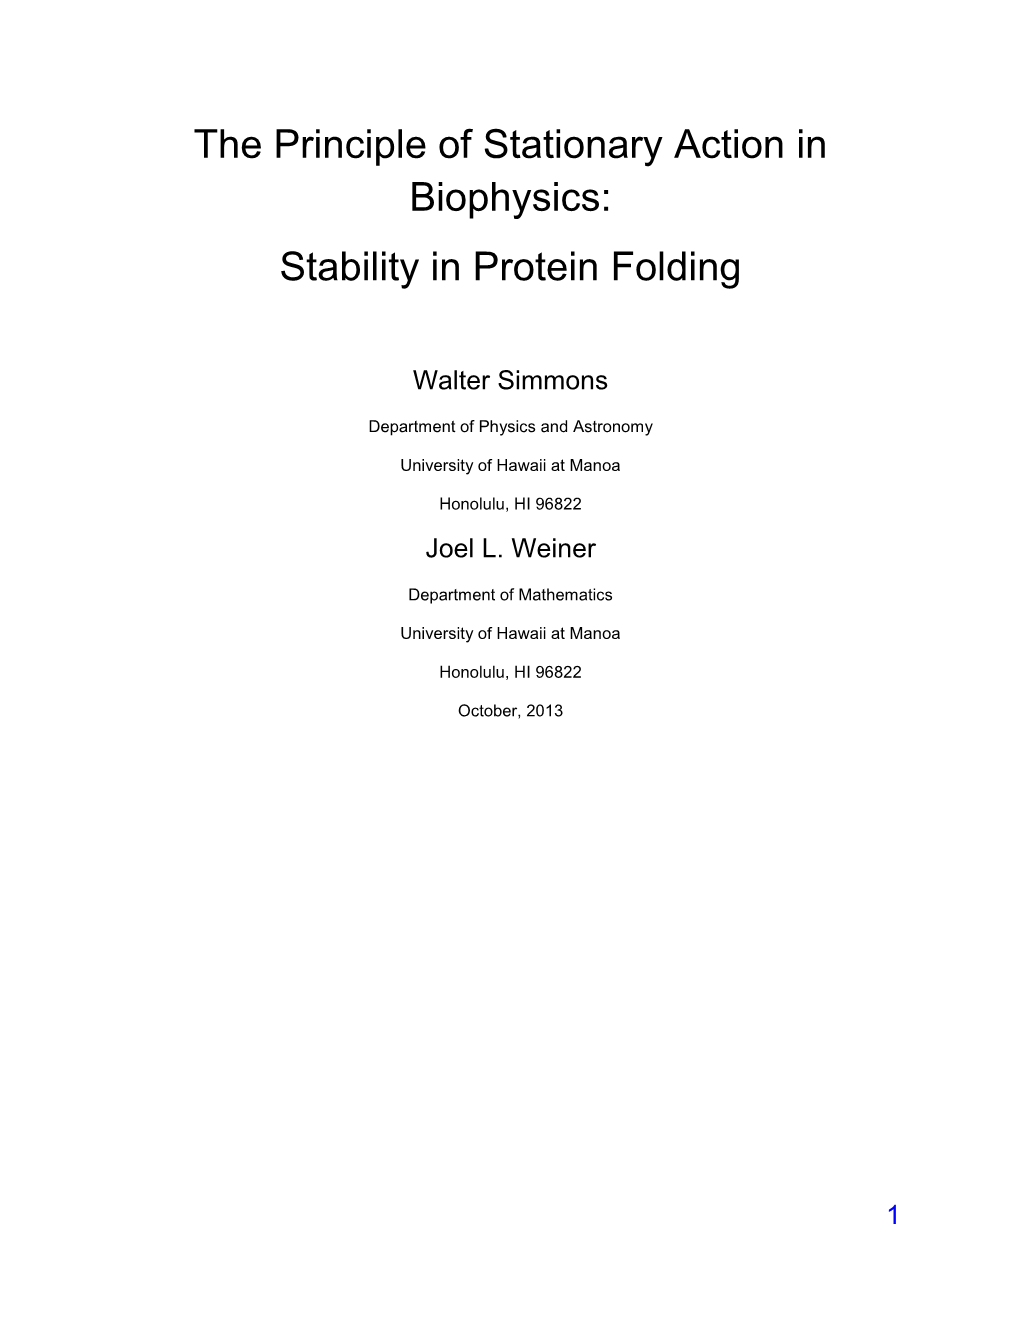 The Principle of Stationary Action in Biophysics: Stability in Protein Folding